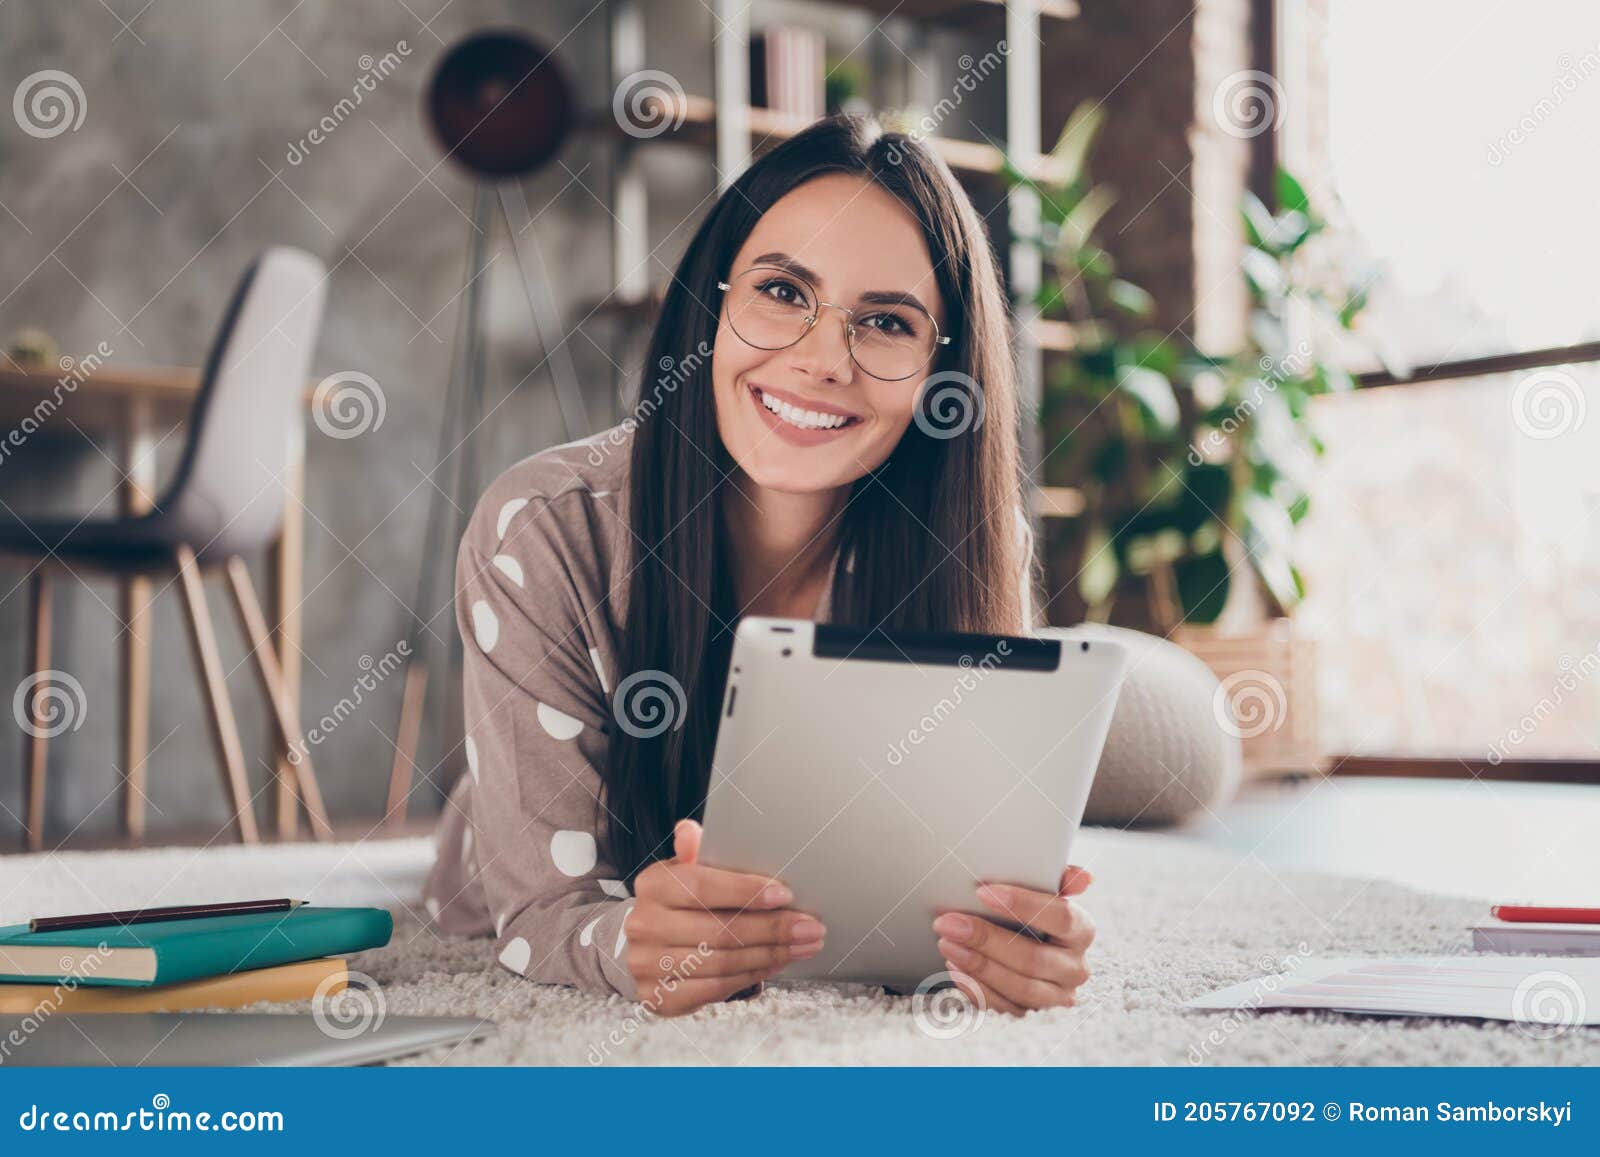 photo of nice optimistic girl lying write tablet wear spectacles pijama at home